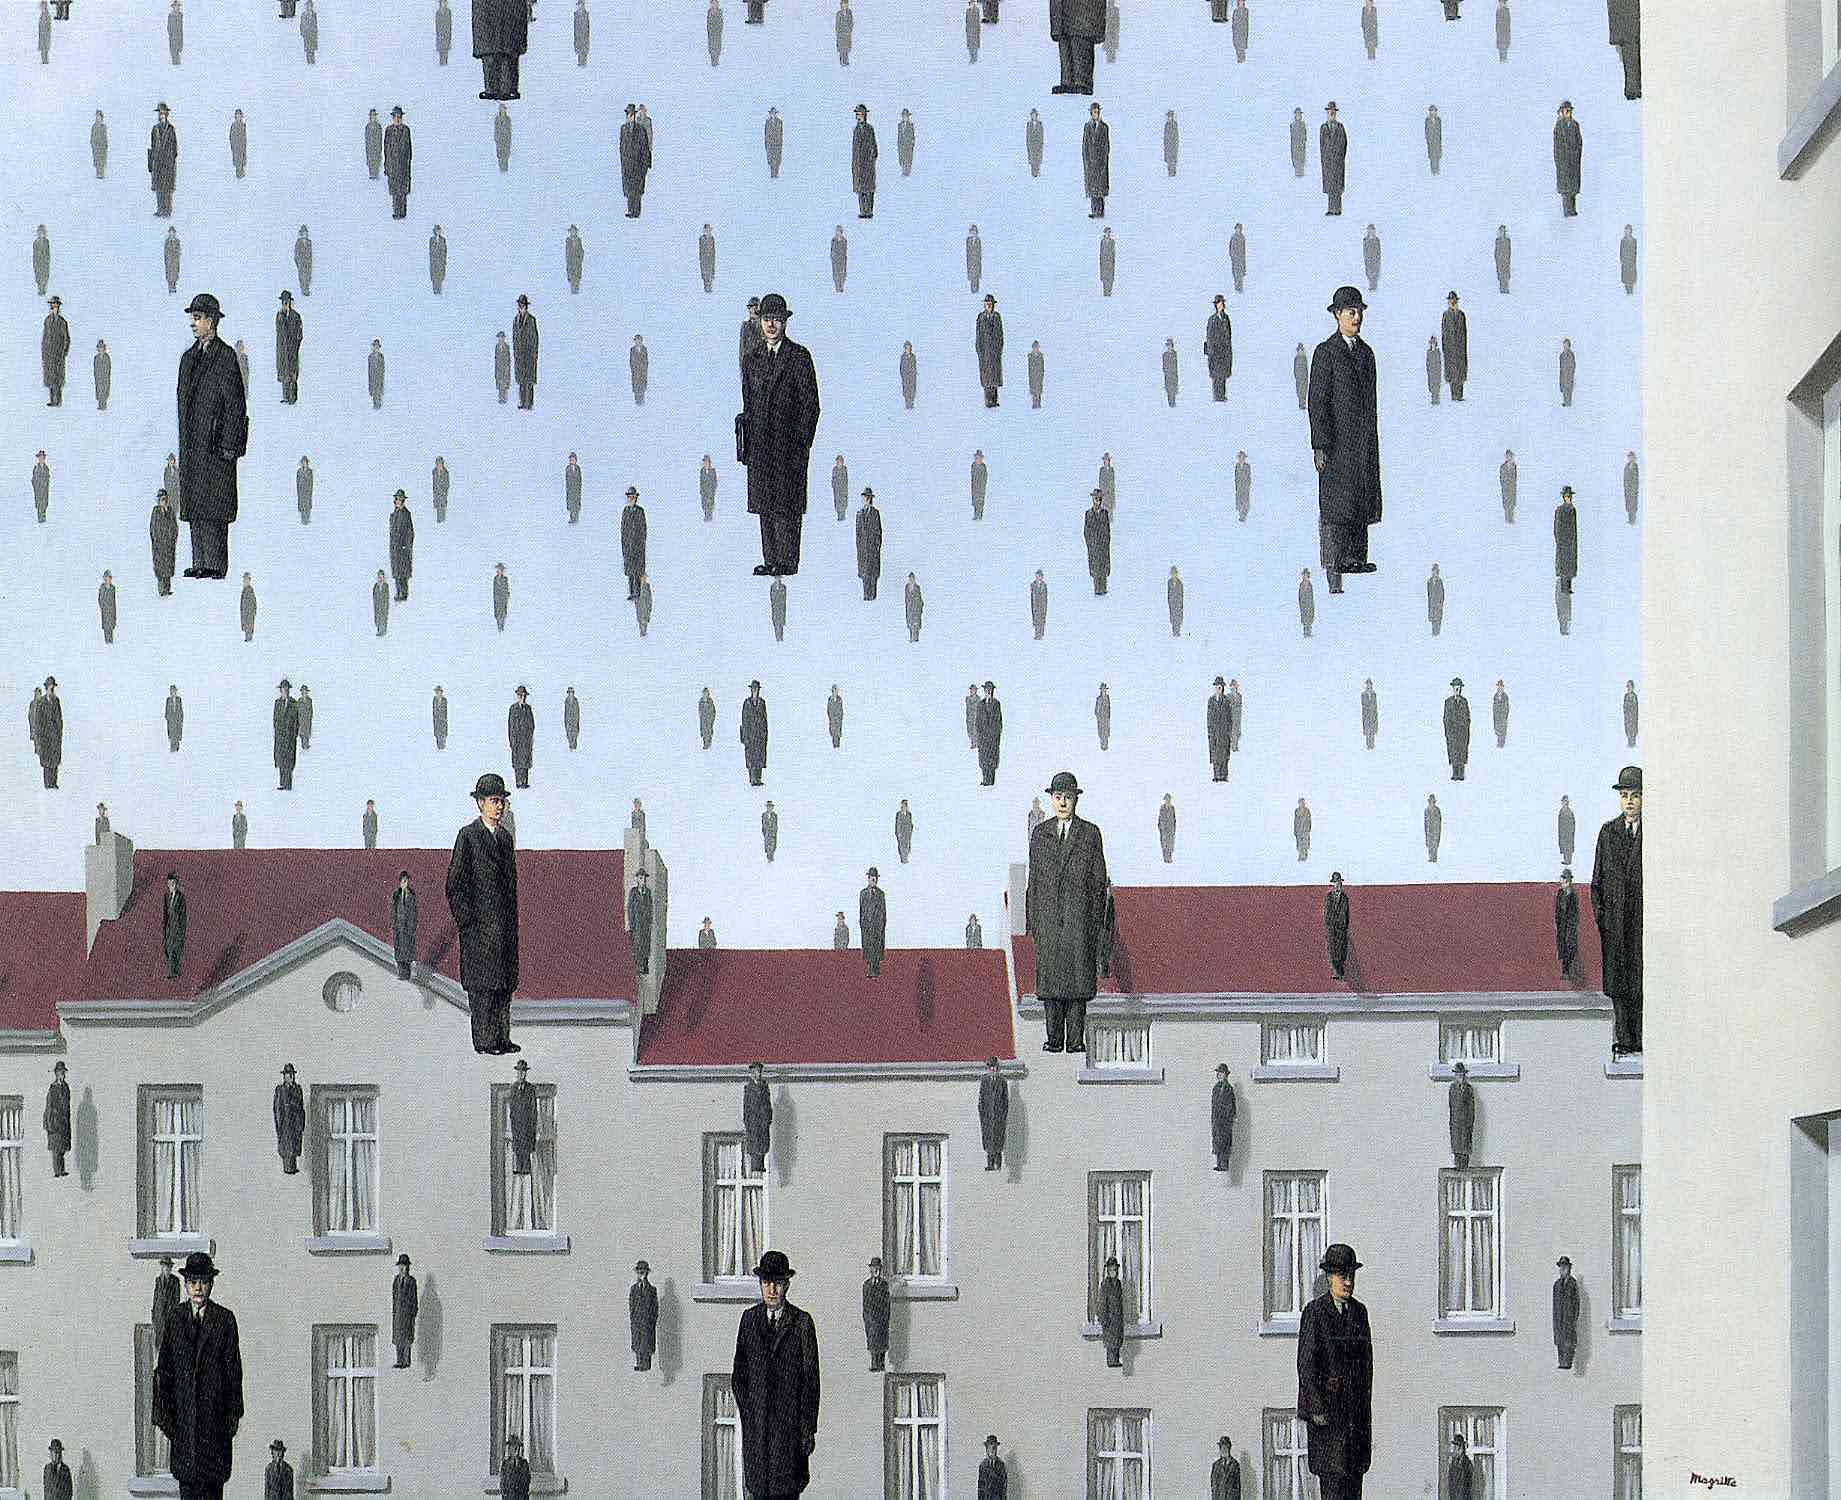 Magritte - "Golconda" painting